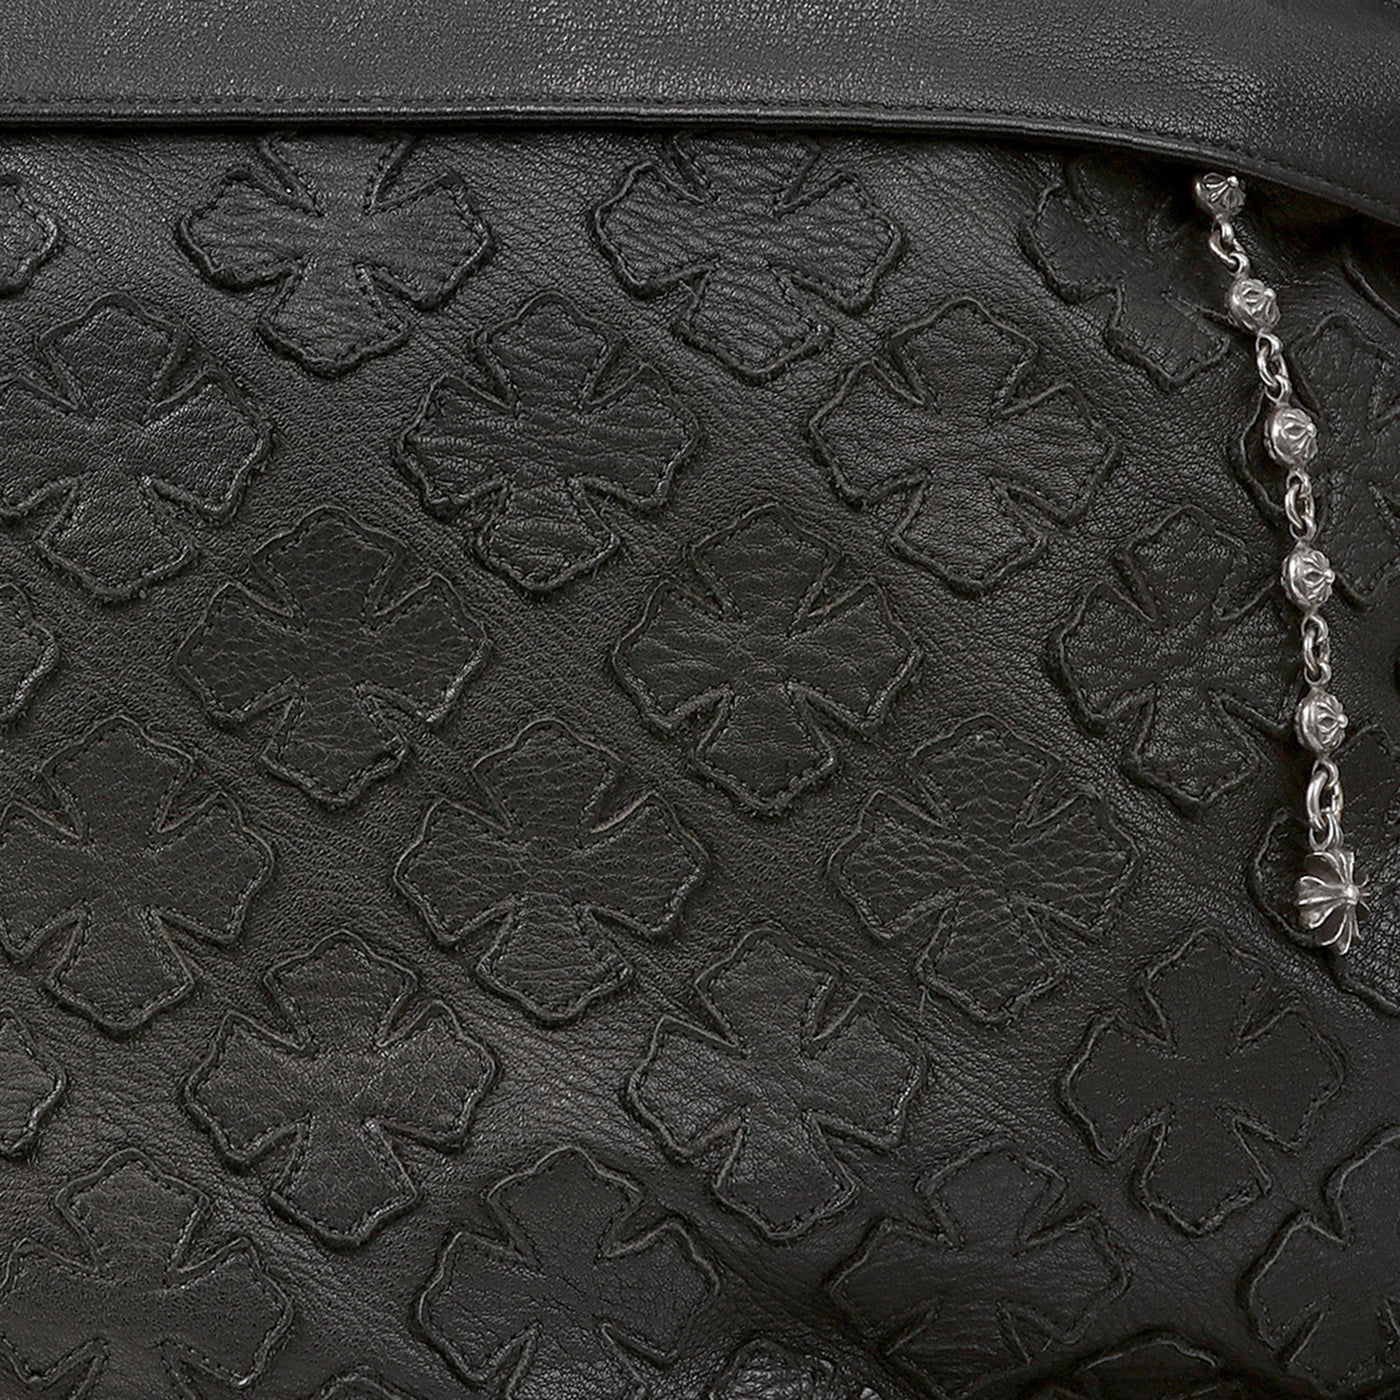 Chrome Hearts Black Leather Tote with Cross Applique